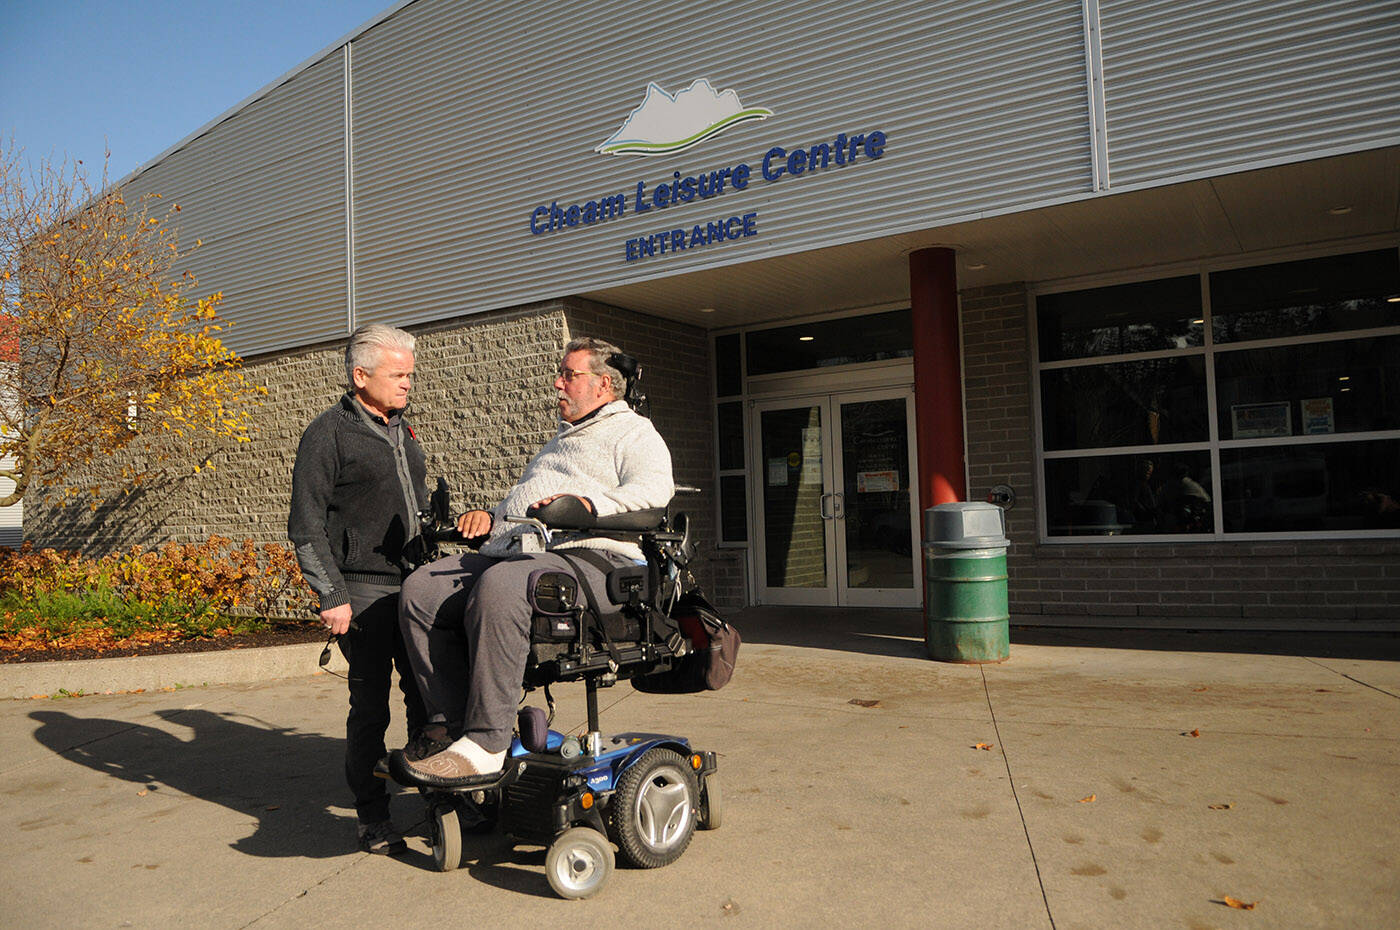 Jim Ryan (right) and Mayor Ken Popove chat outside the Cheam Leisure Centre before a tour of the building on Wednesday, Nov. 10, 2021. Ryan was pointing out some of the features at the centre that earned it the Rick Hansen Foundation Accessibility Certified Gold rating. (Jenna Hauck/ Chilliwack Progress)